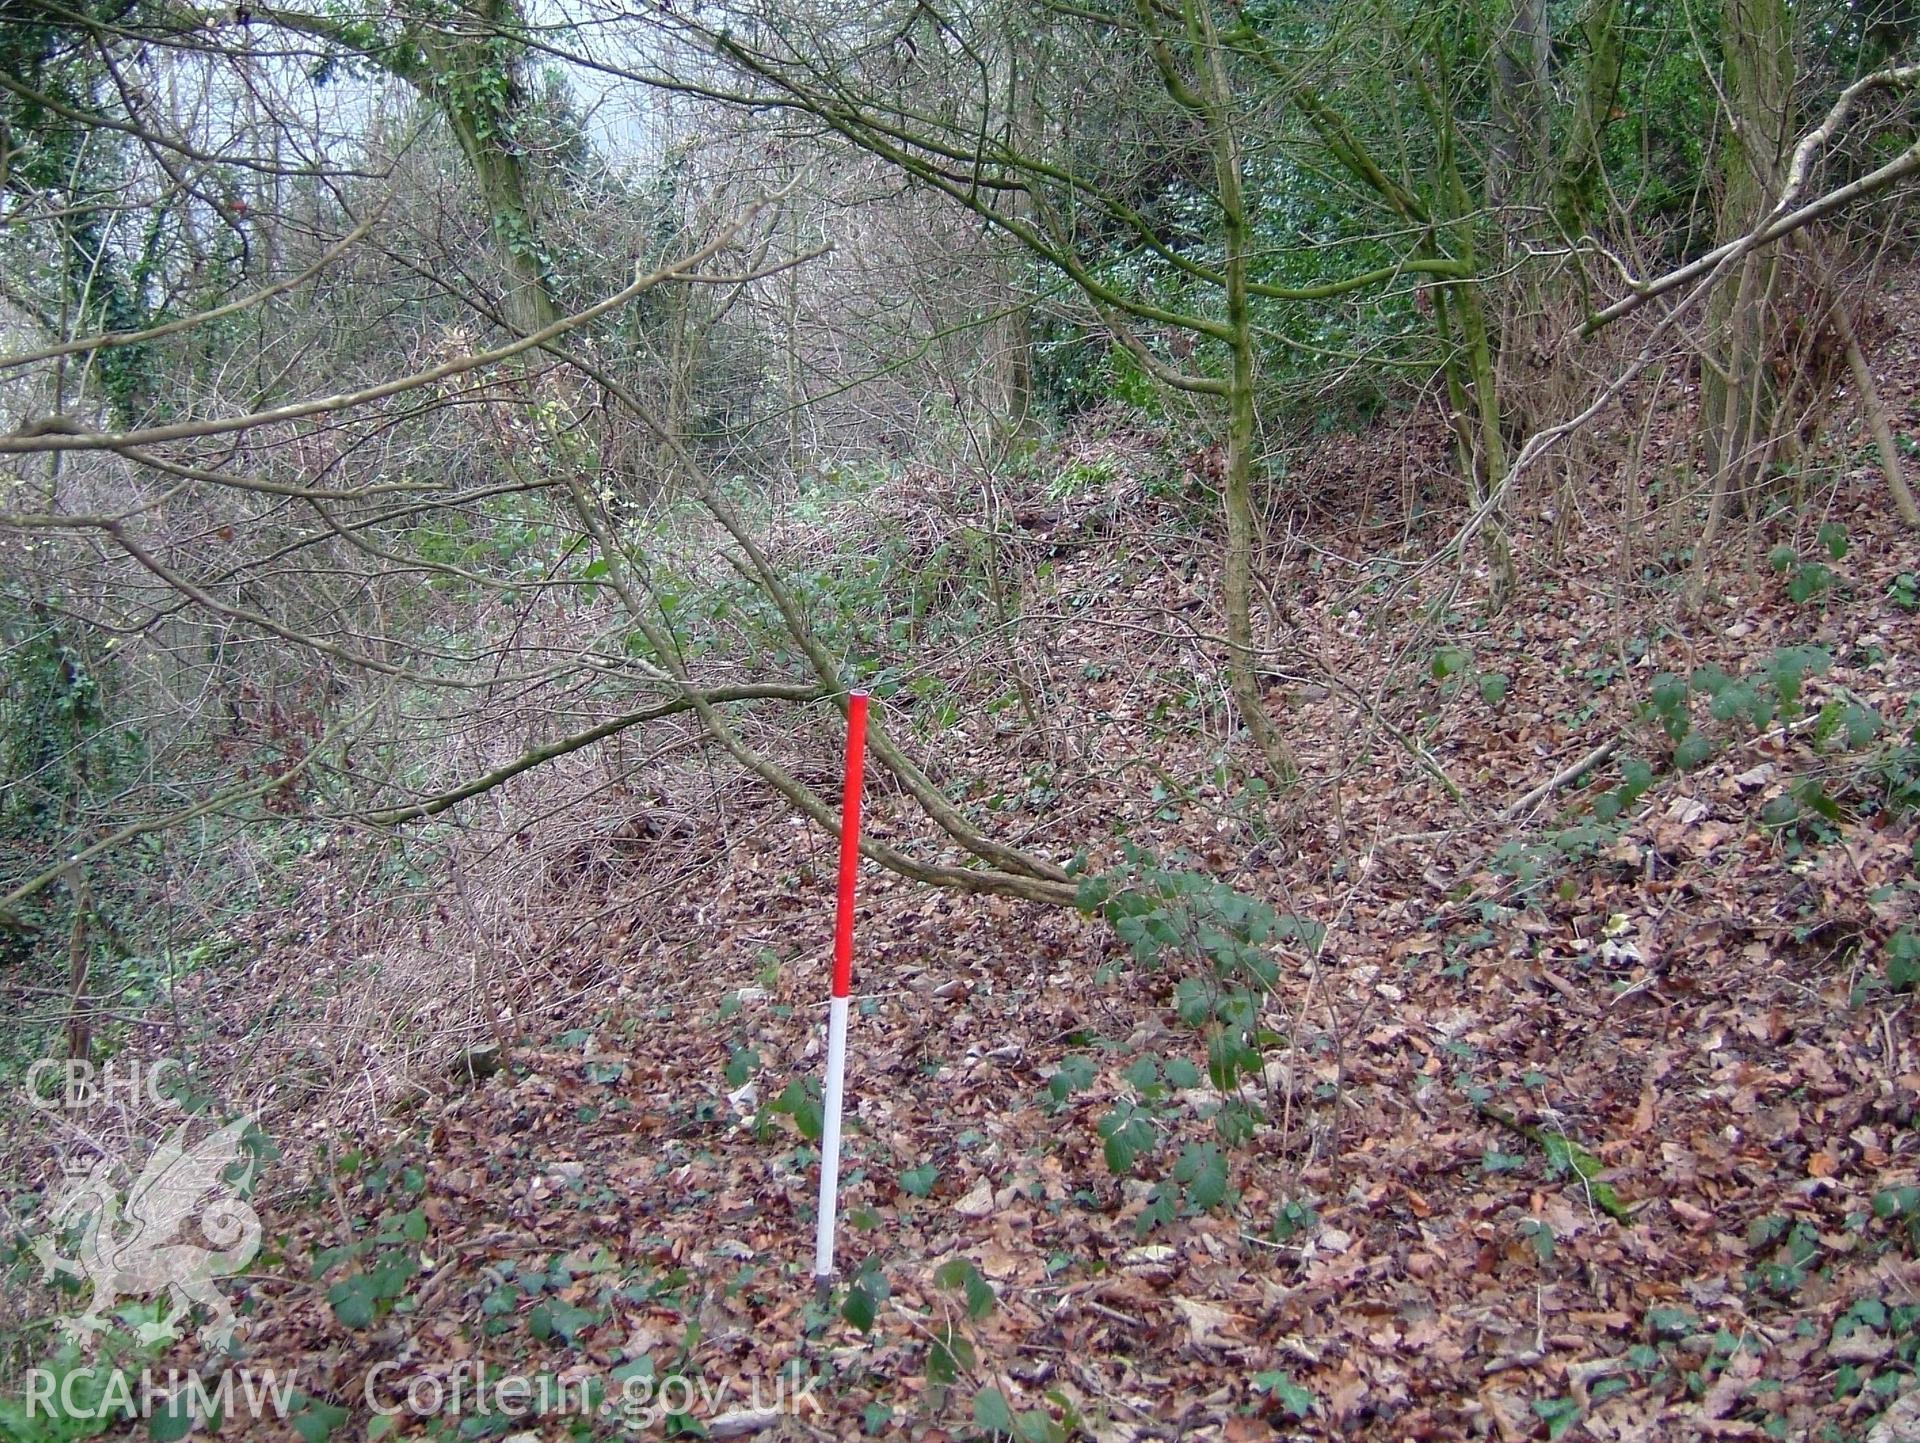 Digital colour photograph taken as part of an archaeological survey at the Piercefield walks, 2004. The photograph shows part of the Piercefield Estate.